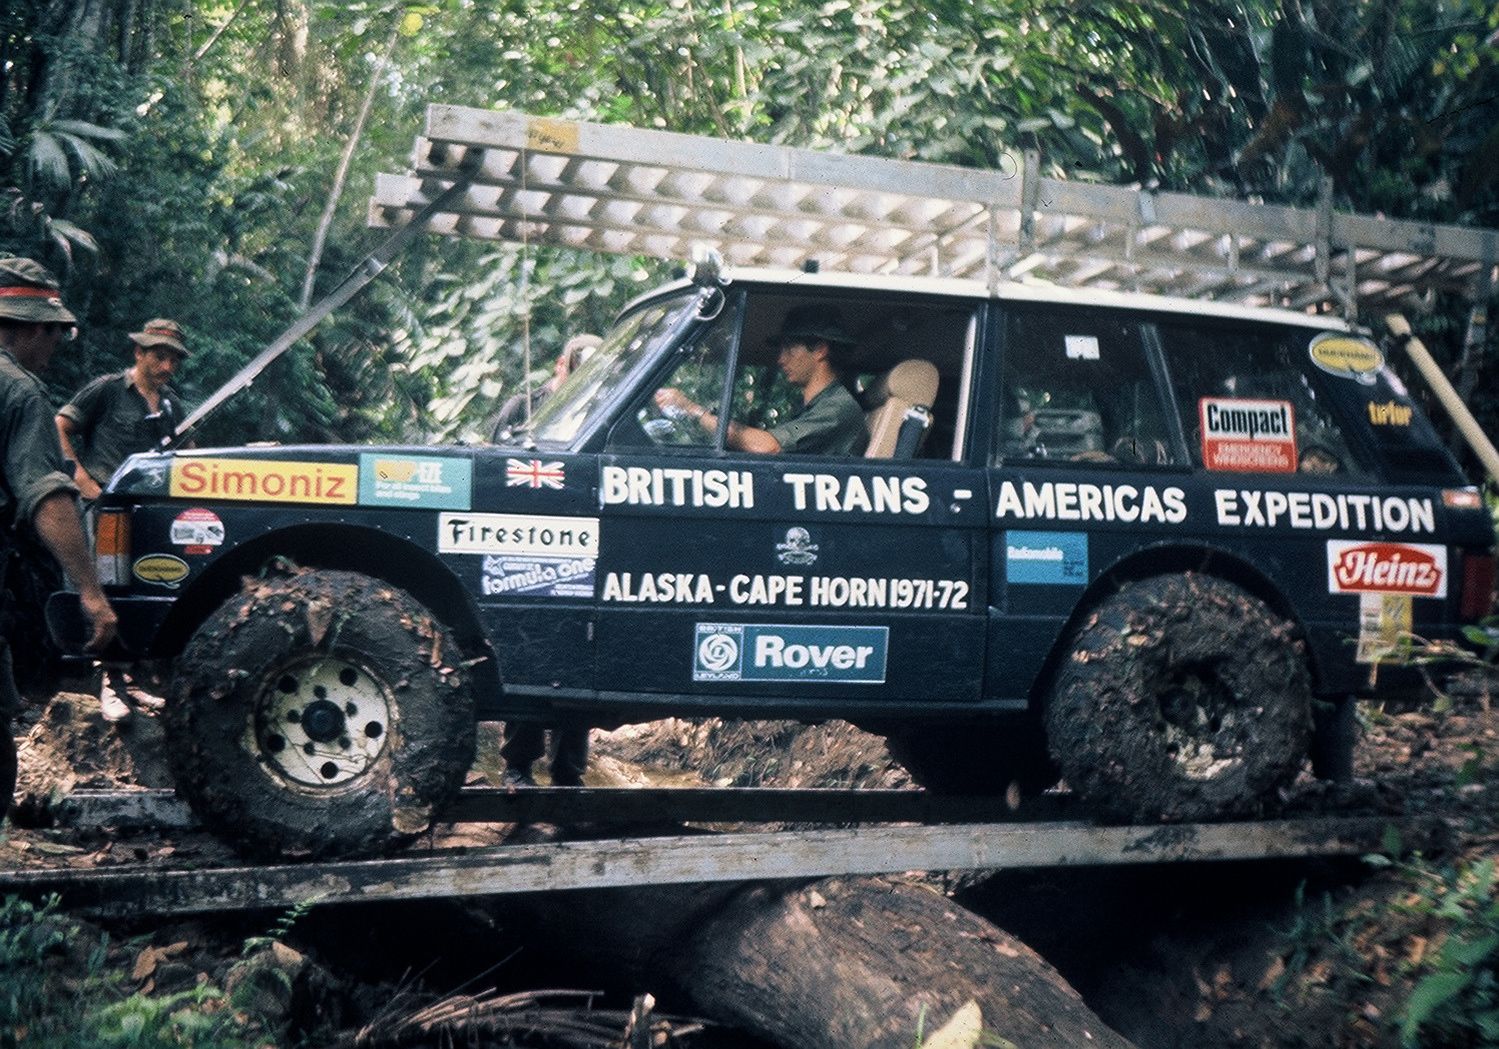 Trans-Americas Expedition Range Rovers